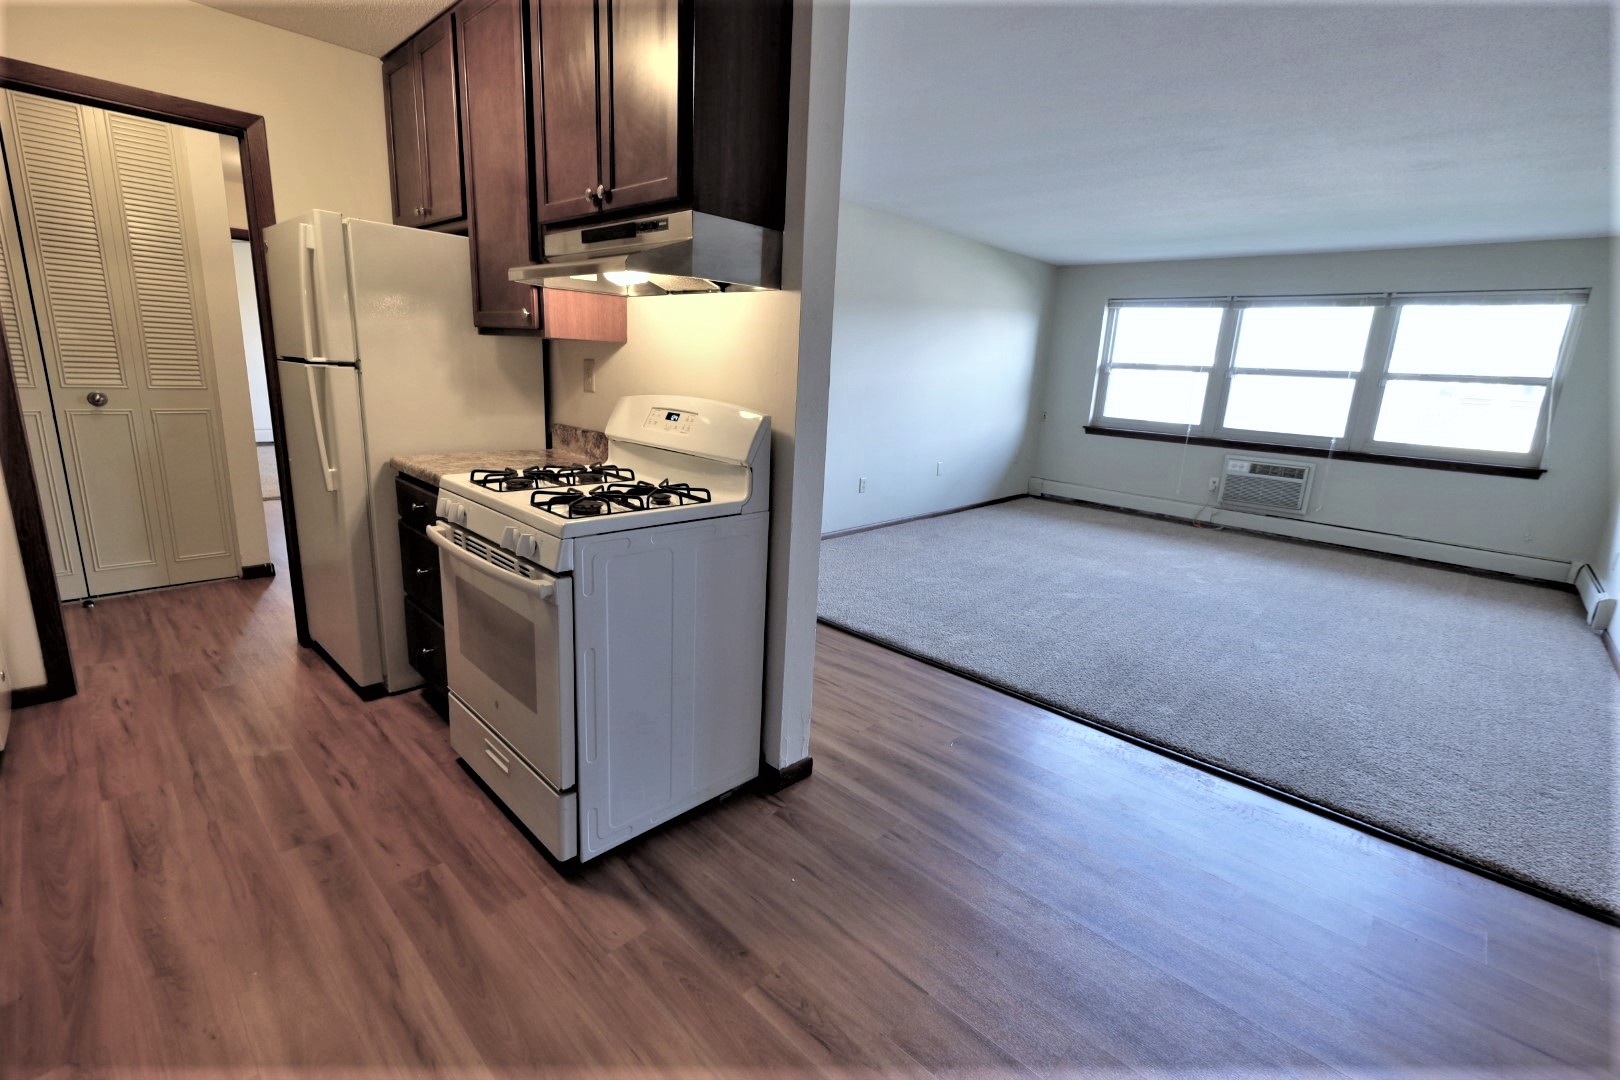 unfurnished apartment in Crystal, Minnesota